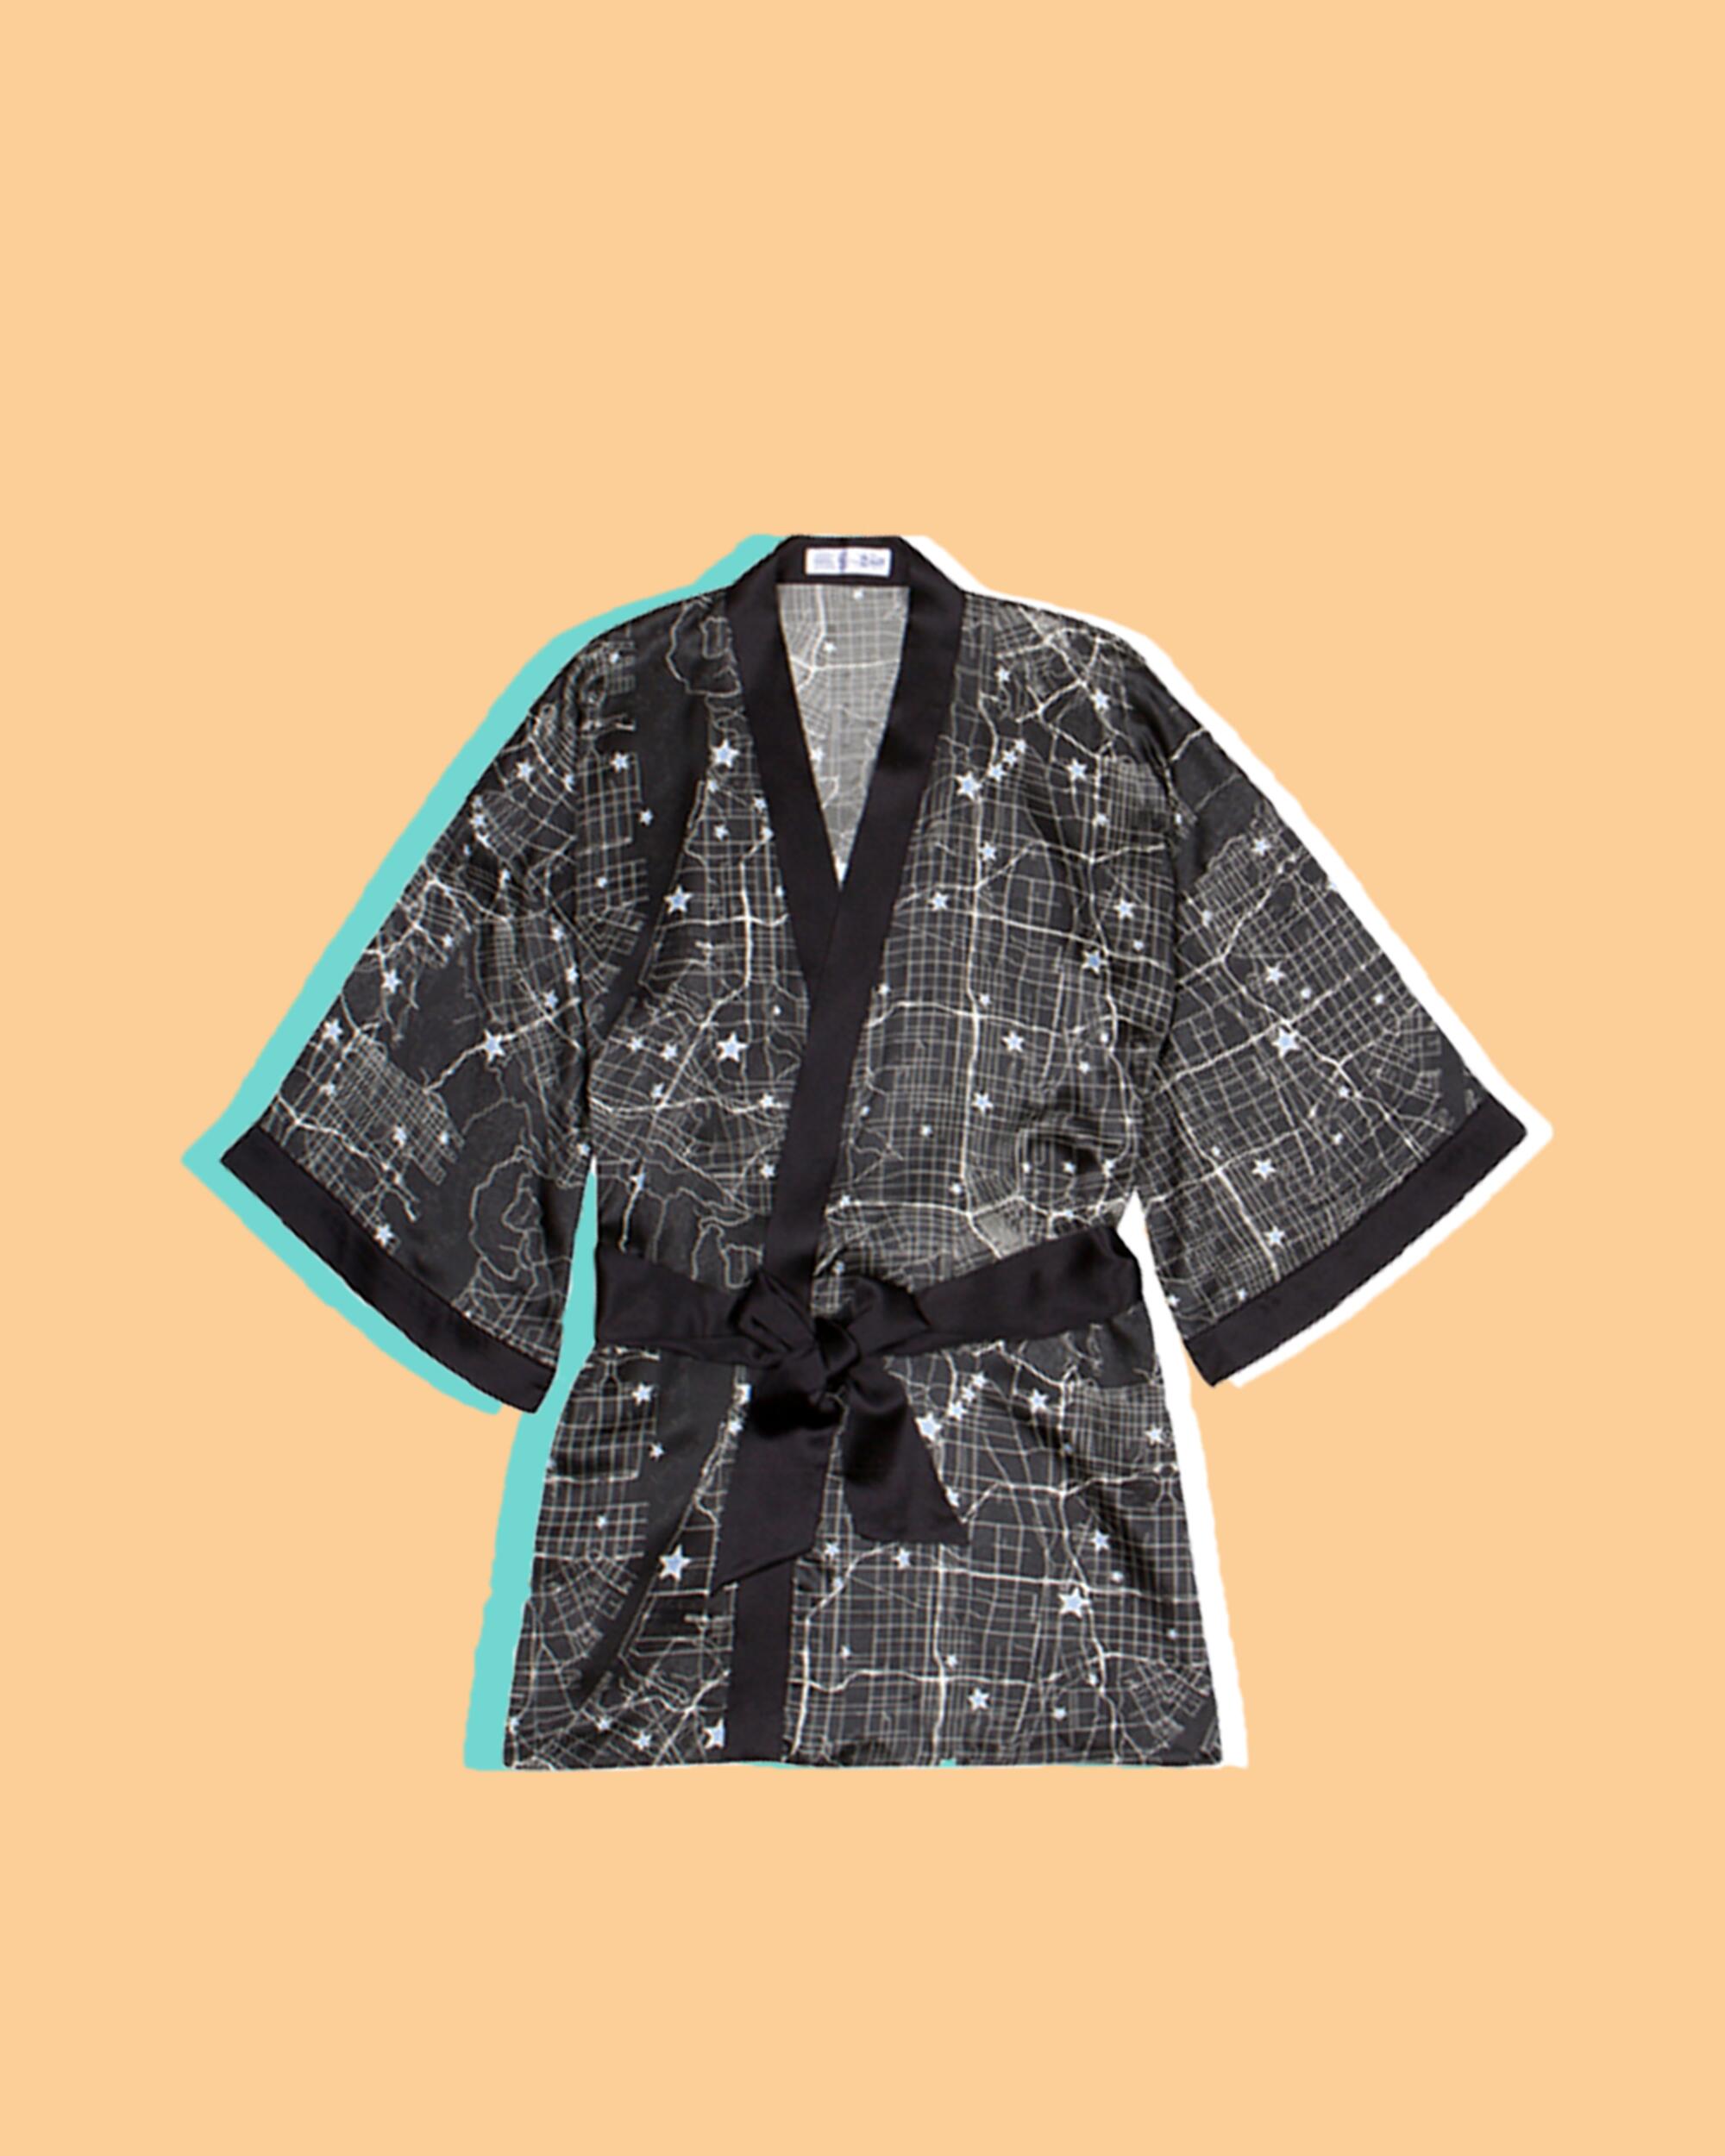 Black and white star map robe from Fred Segal